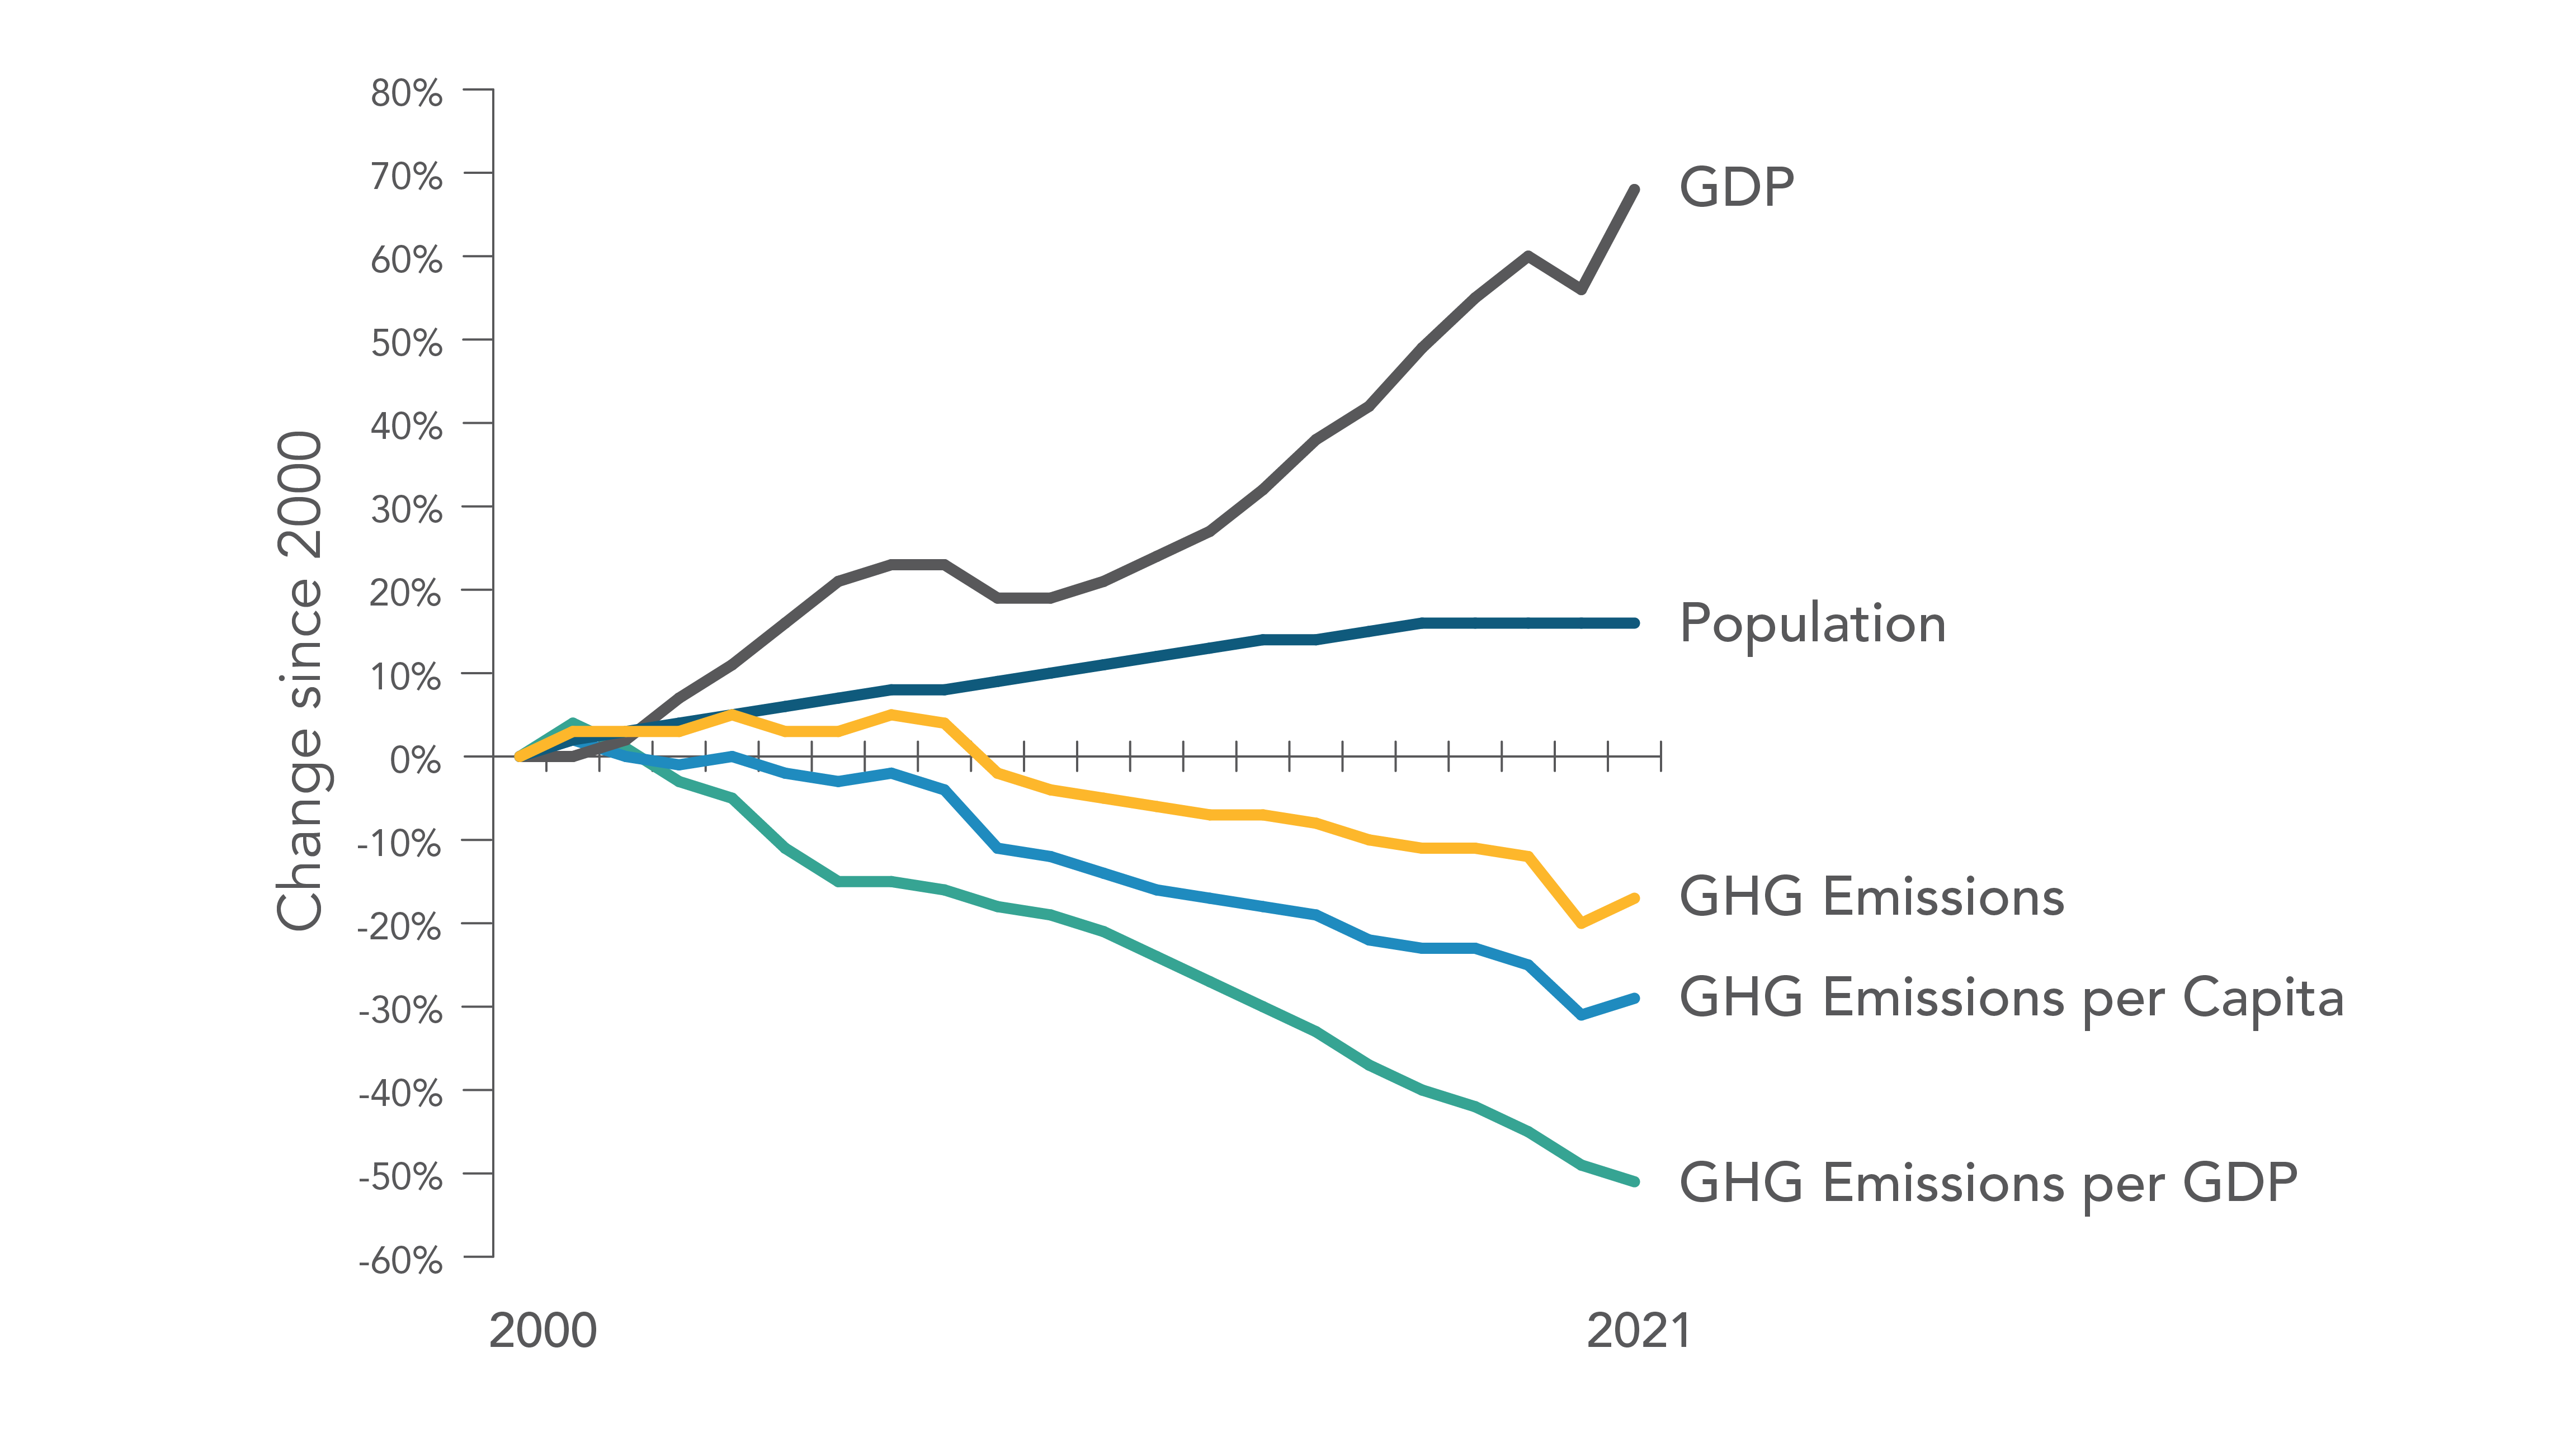 A line graph showing the percentage change in California’s GDP, Population, GHG Emissions, GHG Emissions per Capita, and GHG Emissions per unit GDP in 2001 to 2021 relative to 2000. California’s GDP and population have increased almost every year since 2000. Since 2007, the GHG Emissions, GHG Emissions per Capita, and GHG Emissions per unit GDP have steadily decreased. For more information on data displayed, contact ghginventory@arb.ca.gov. 